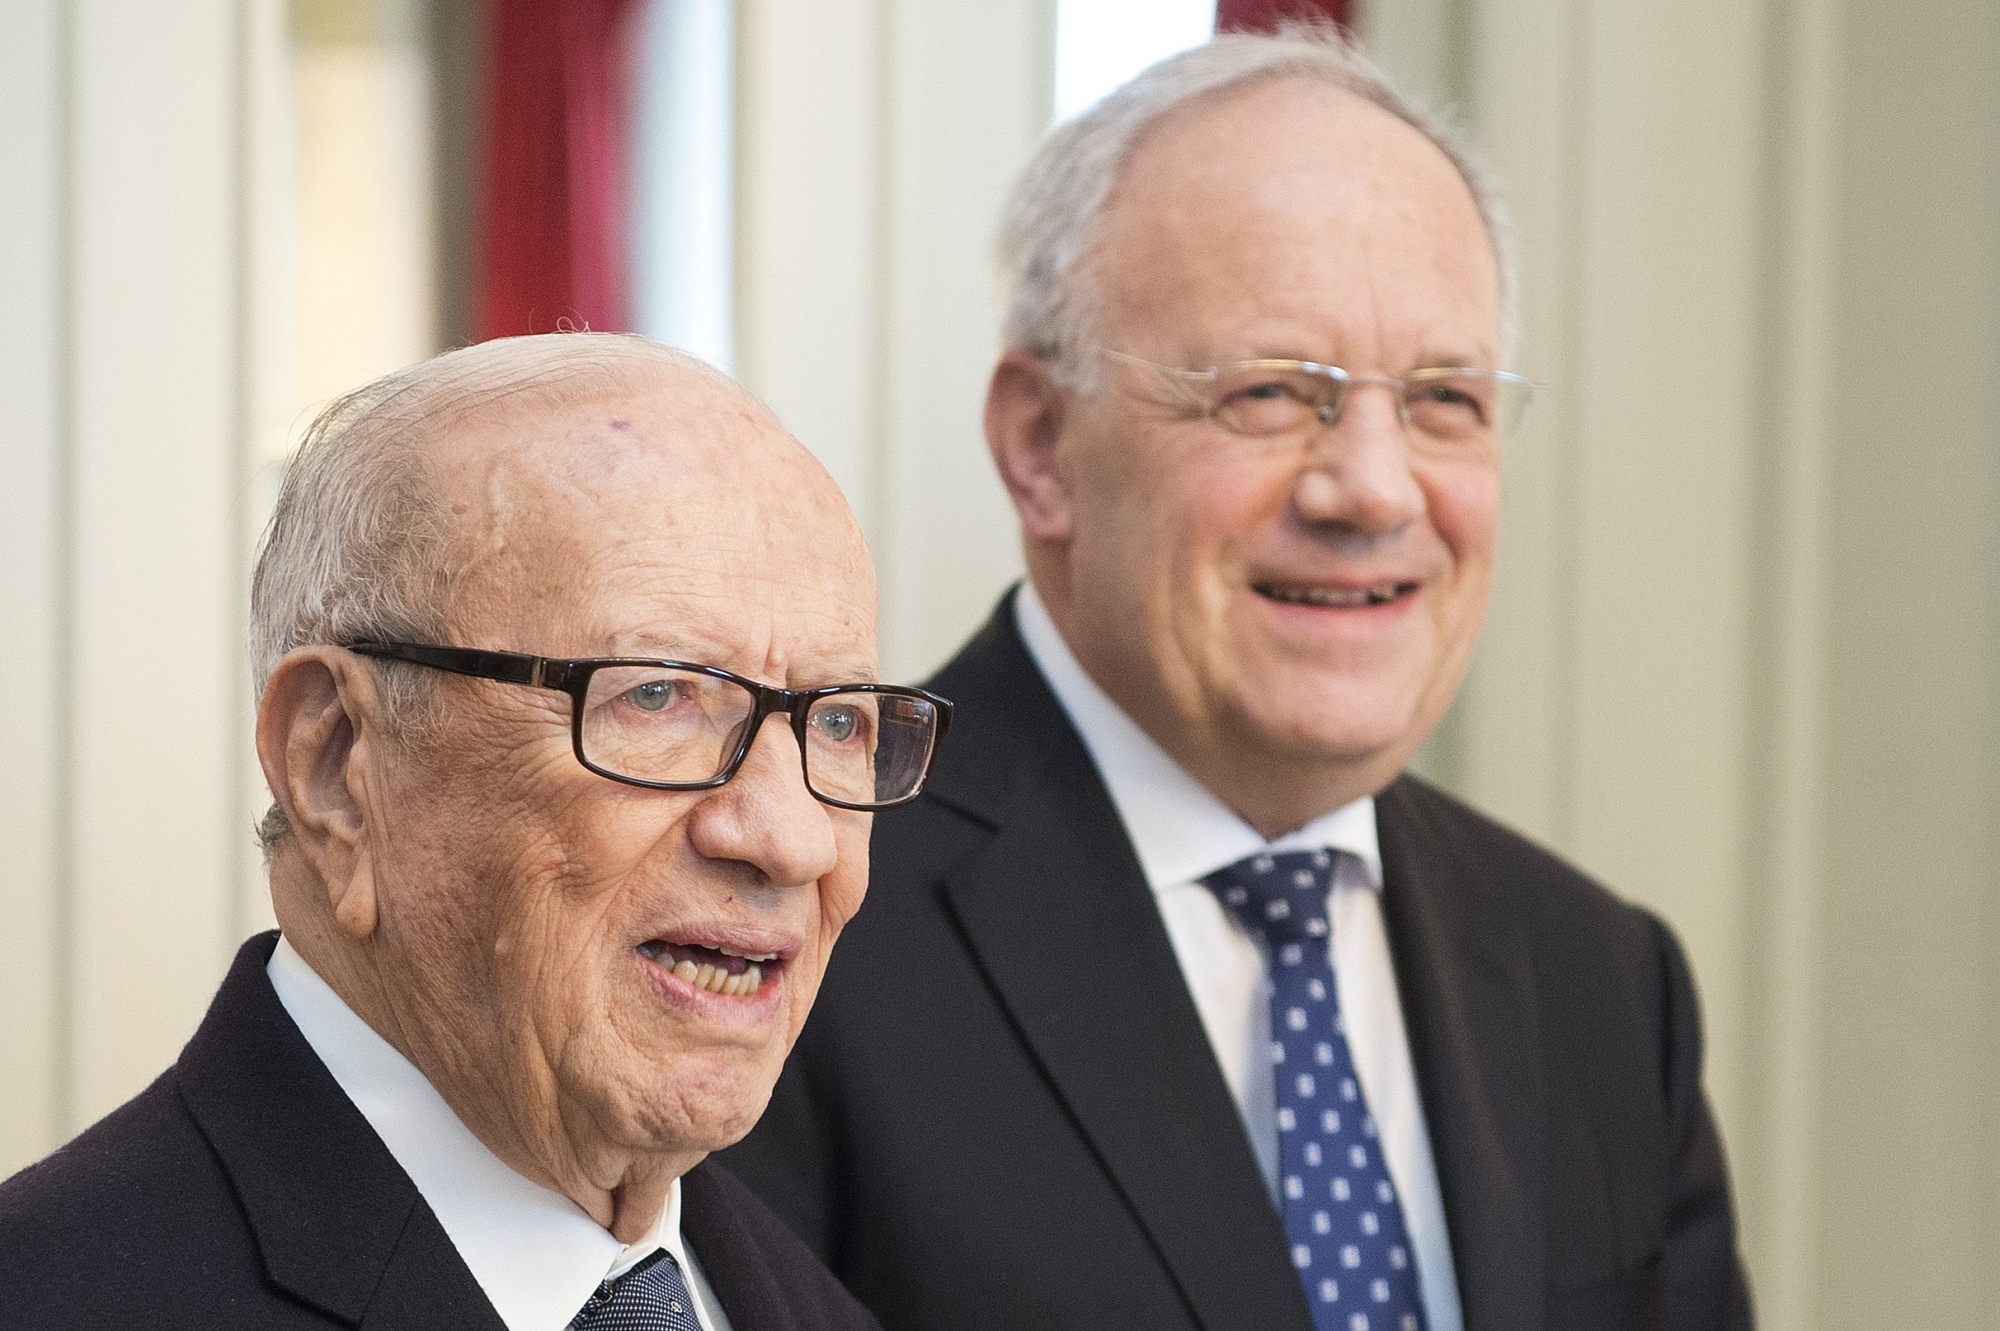 Tunisiaís President Beji Caid Essebsi, left, and Federal President of Switzerland, Johann Schneider-Ammann, right, are smiling during a signing ceremony in Bern, Switzerland, Friday, February 19, 2016. Essebsi is on a two day state visit to Switzerland. (KEYSTONE/Peter Schneider) SWITZERLAND TUNISIA STATE VISIT